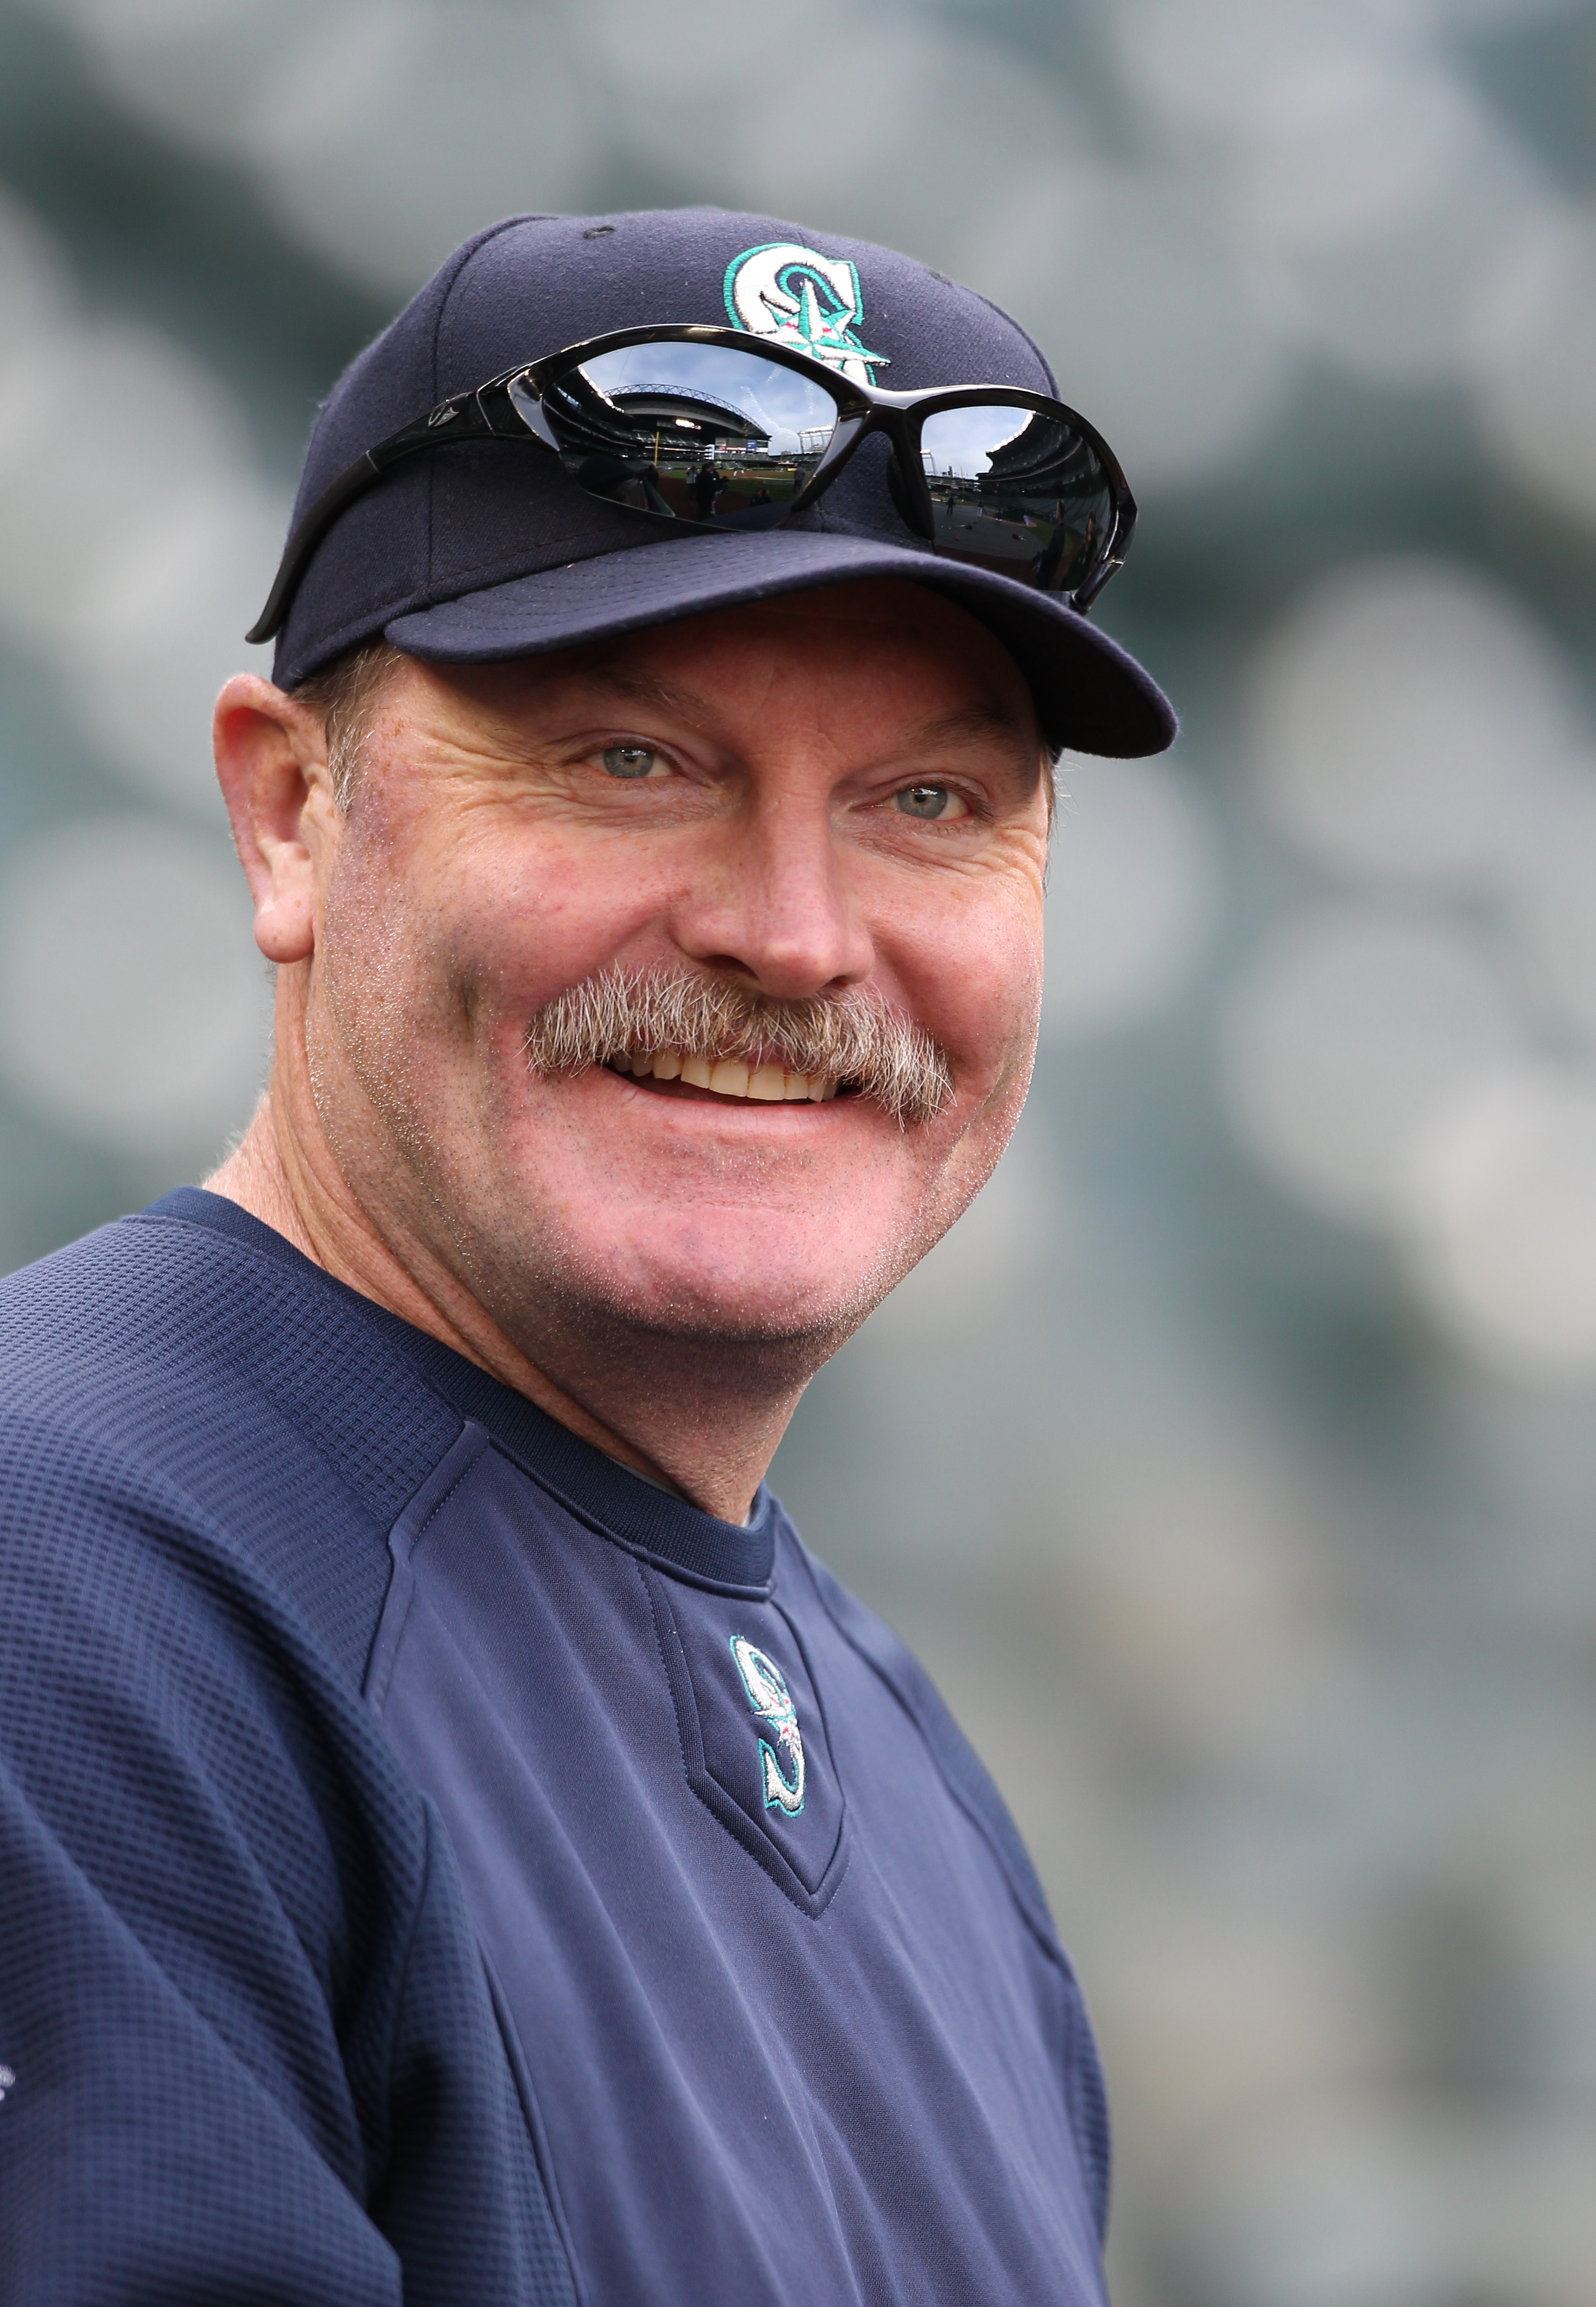 It's already been a rough year for Eric Wedge. And his mustache.